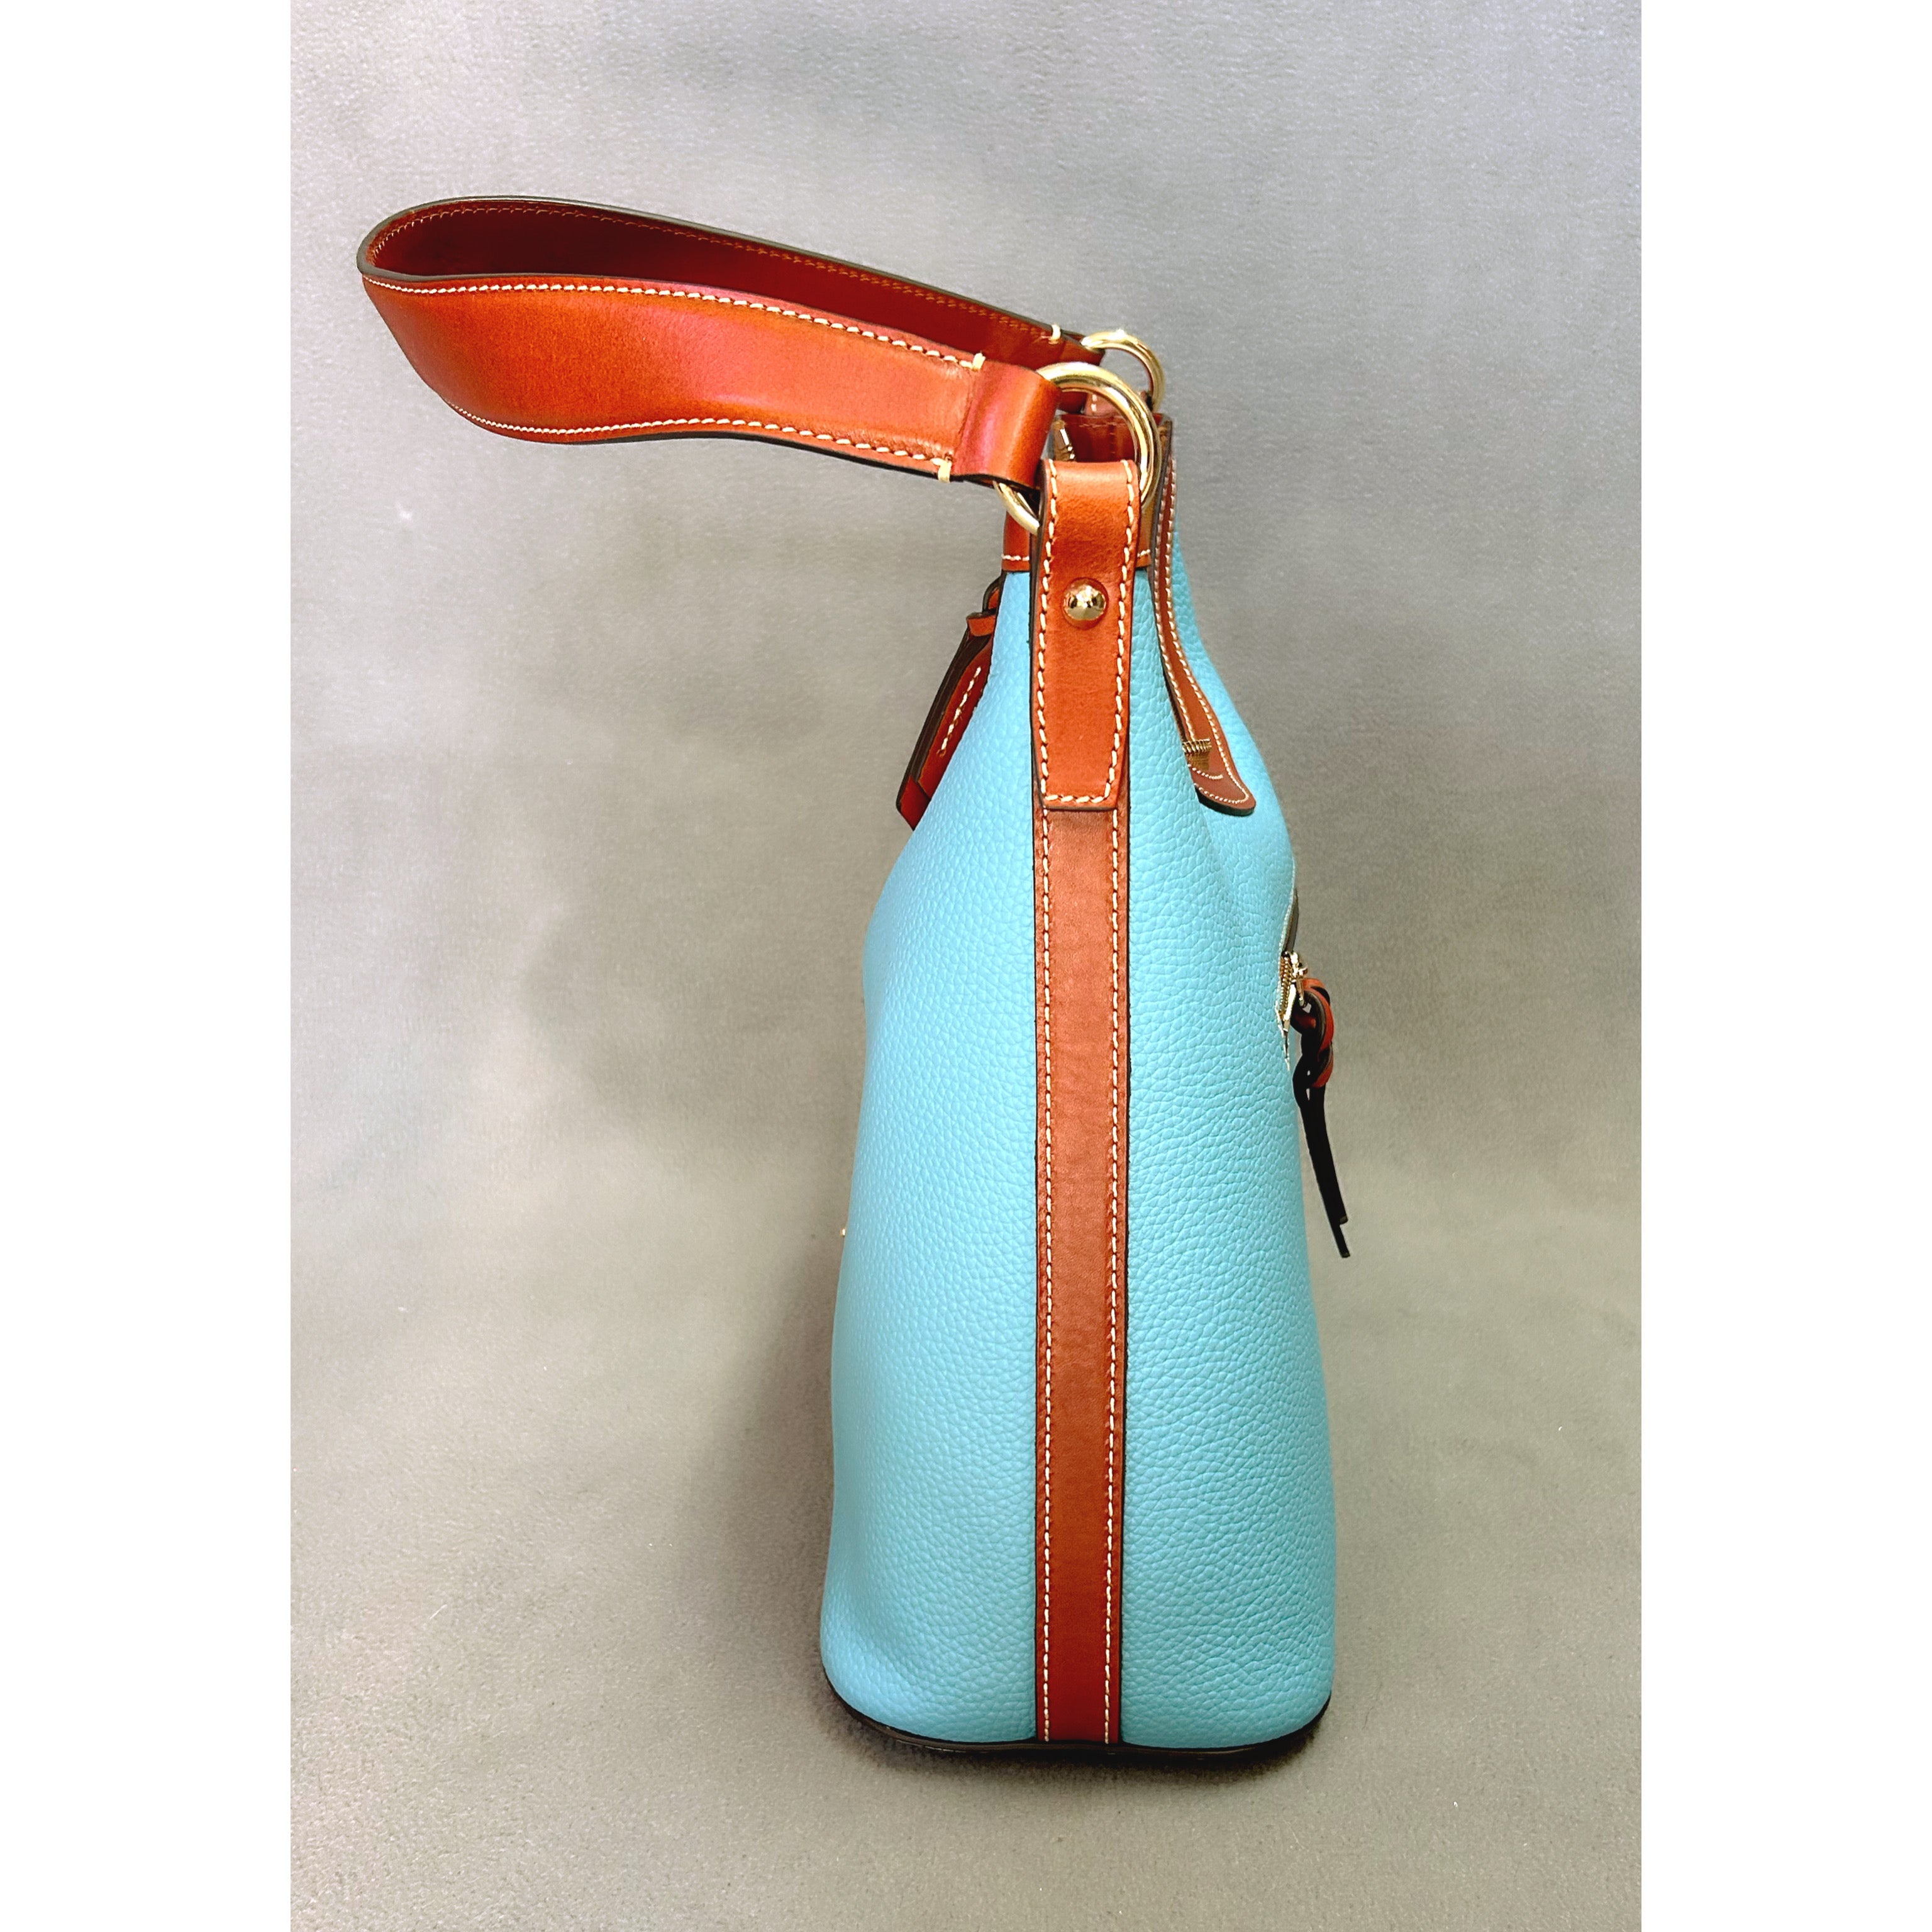 Dooney & Bourke turquoise bag, NEW w/TAGS!